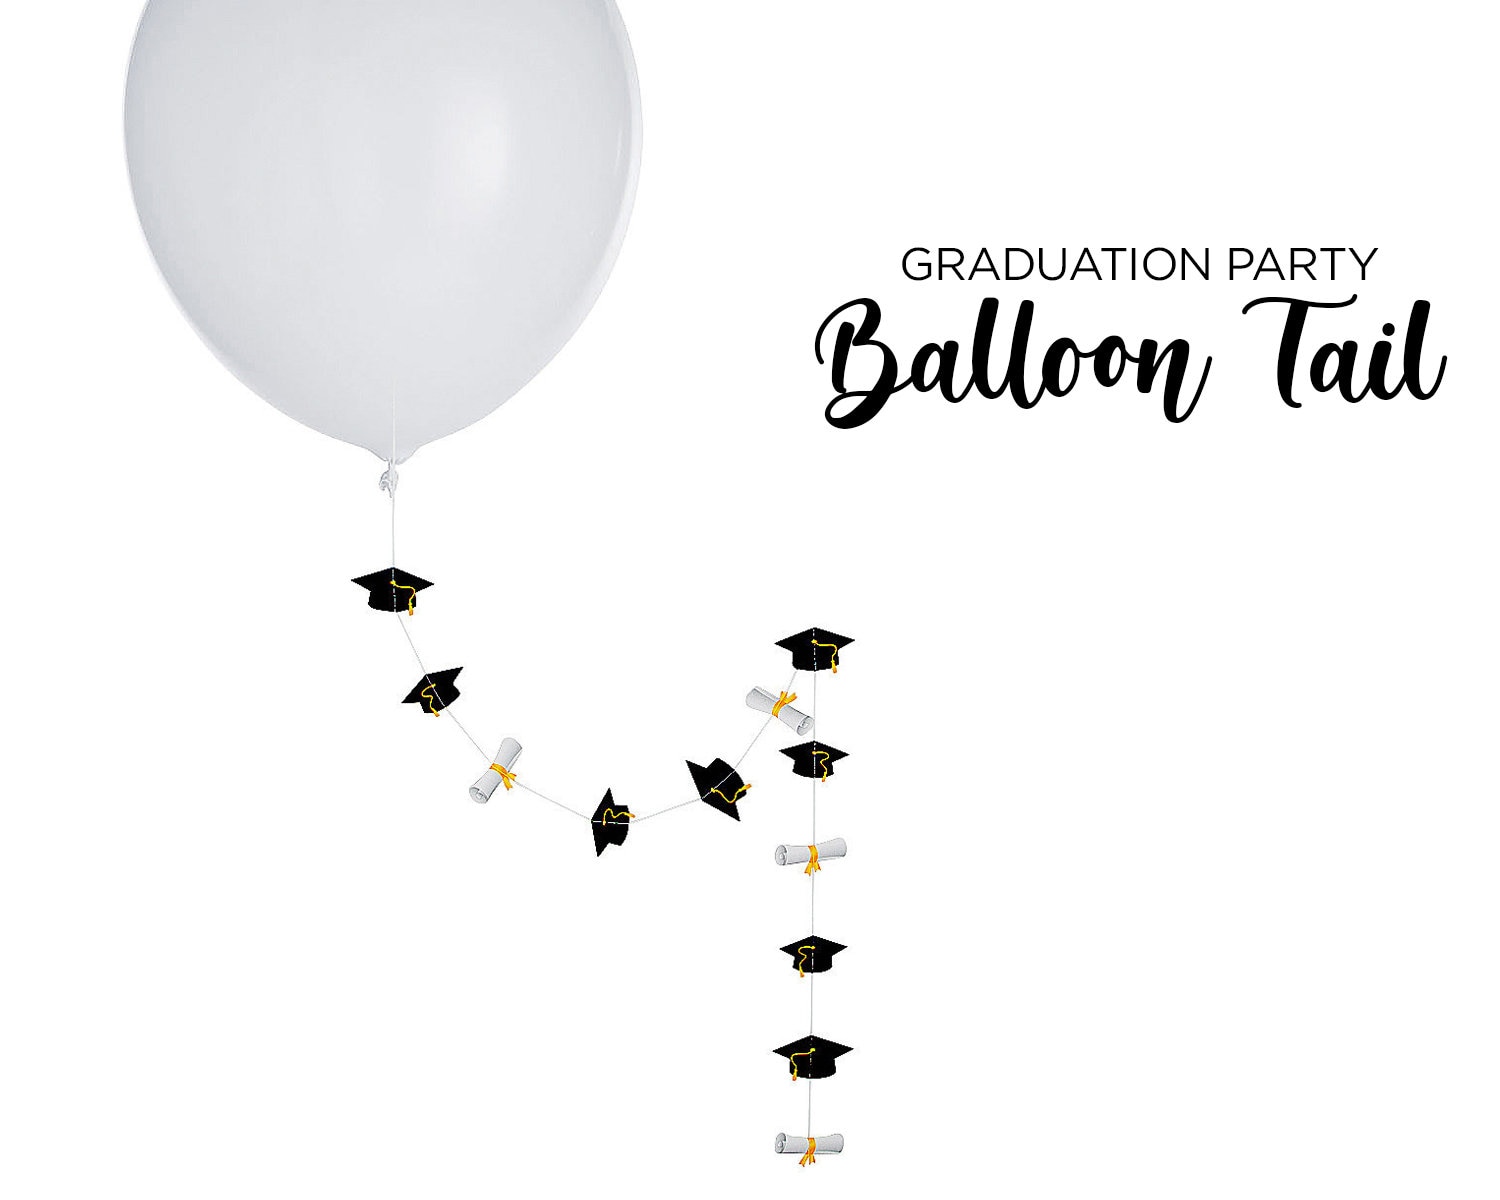 Graduation Balloon Tail With Caps and Diploma Black White Grad